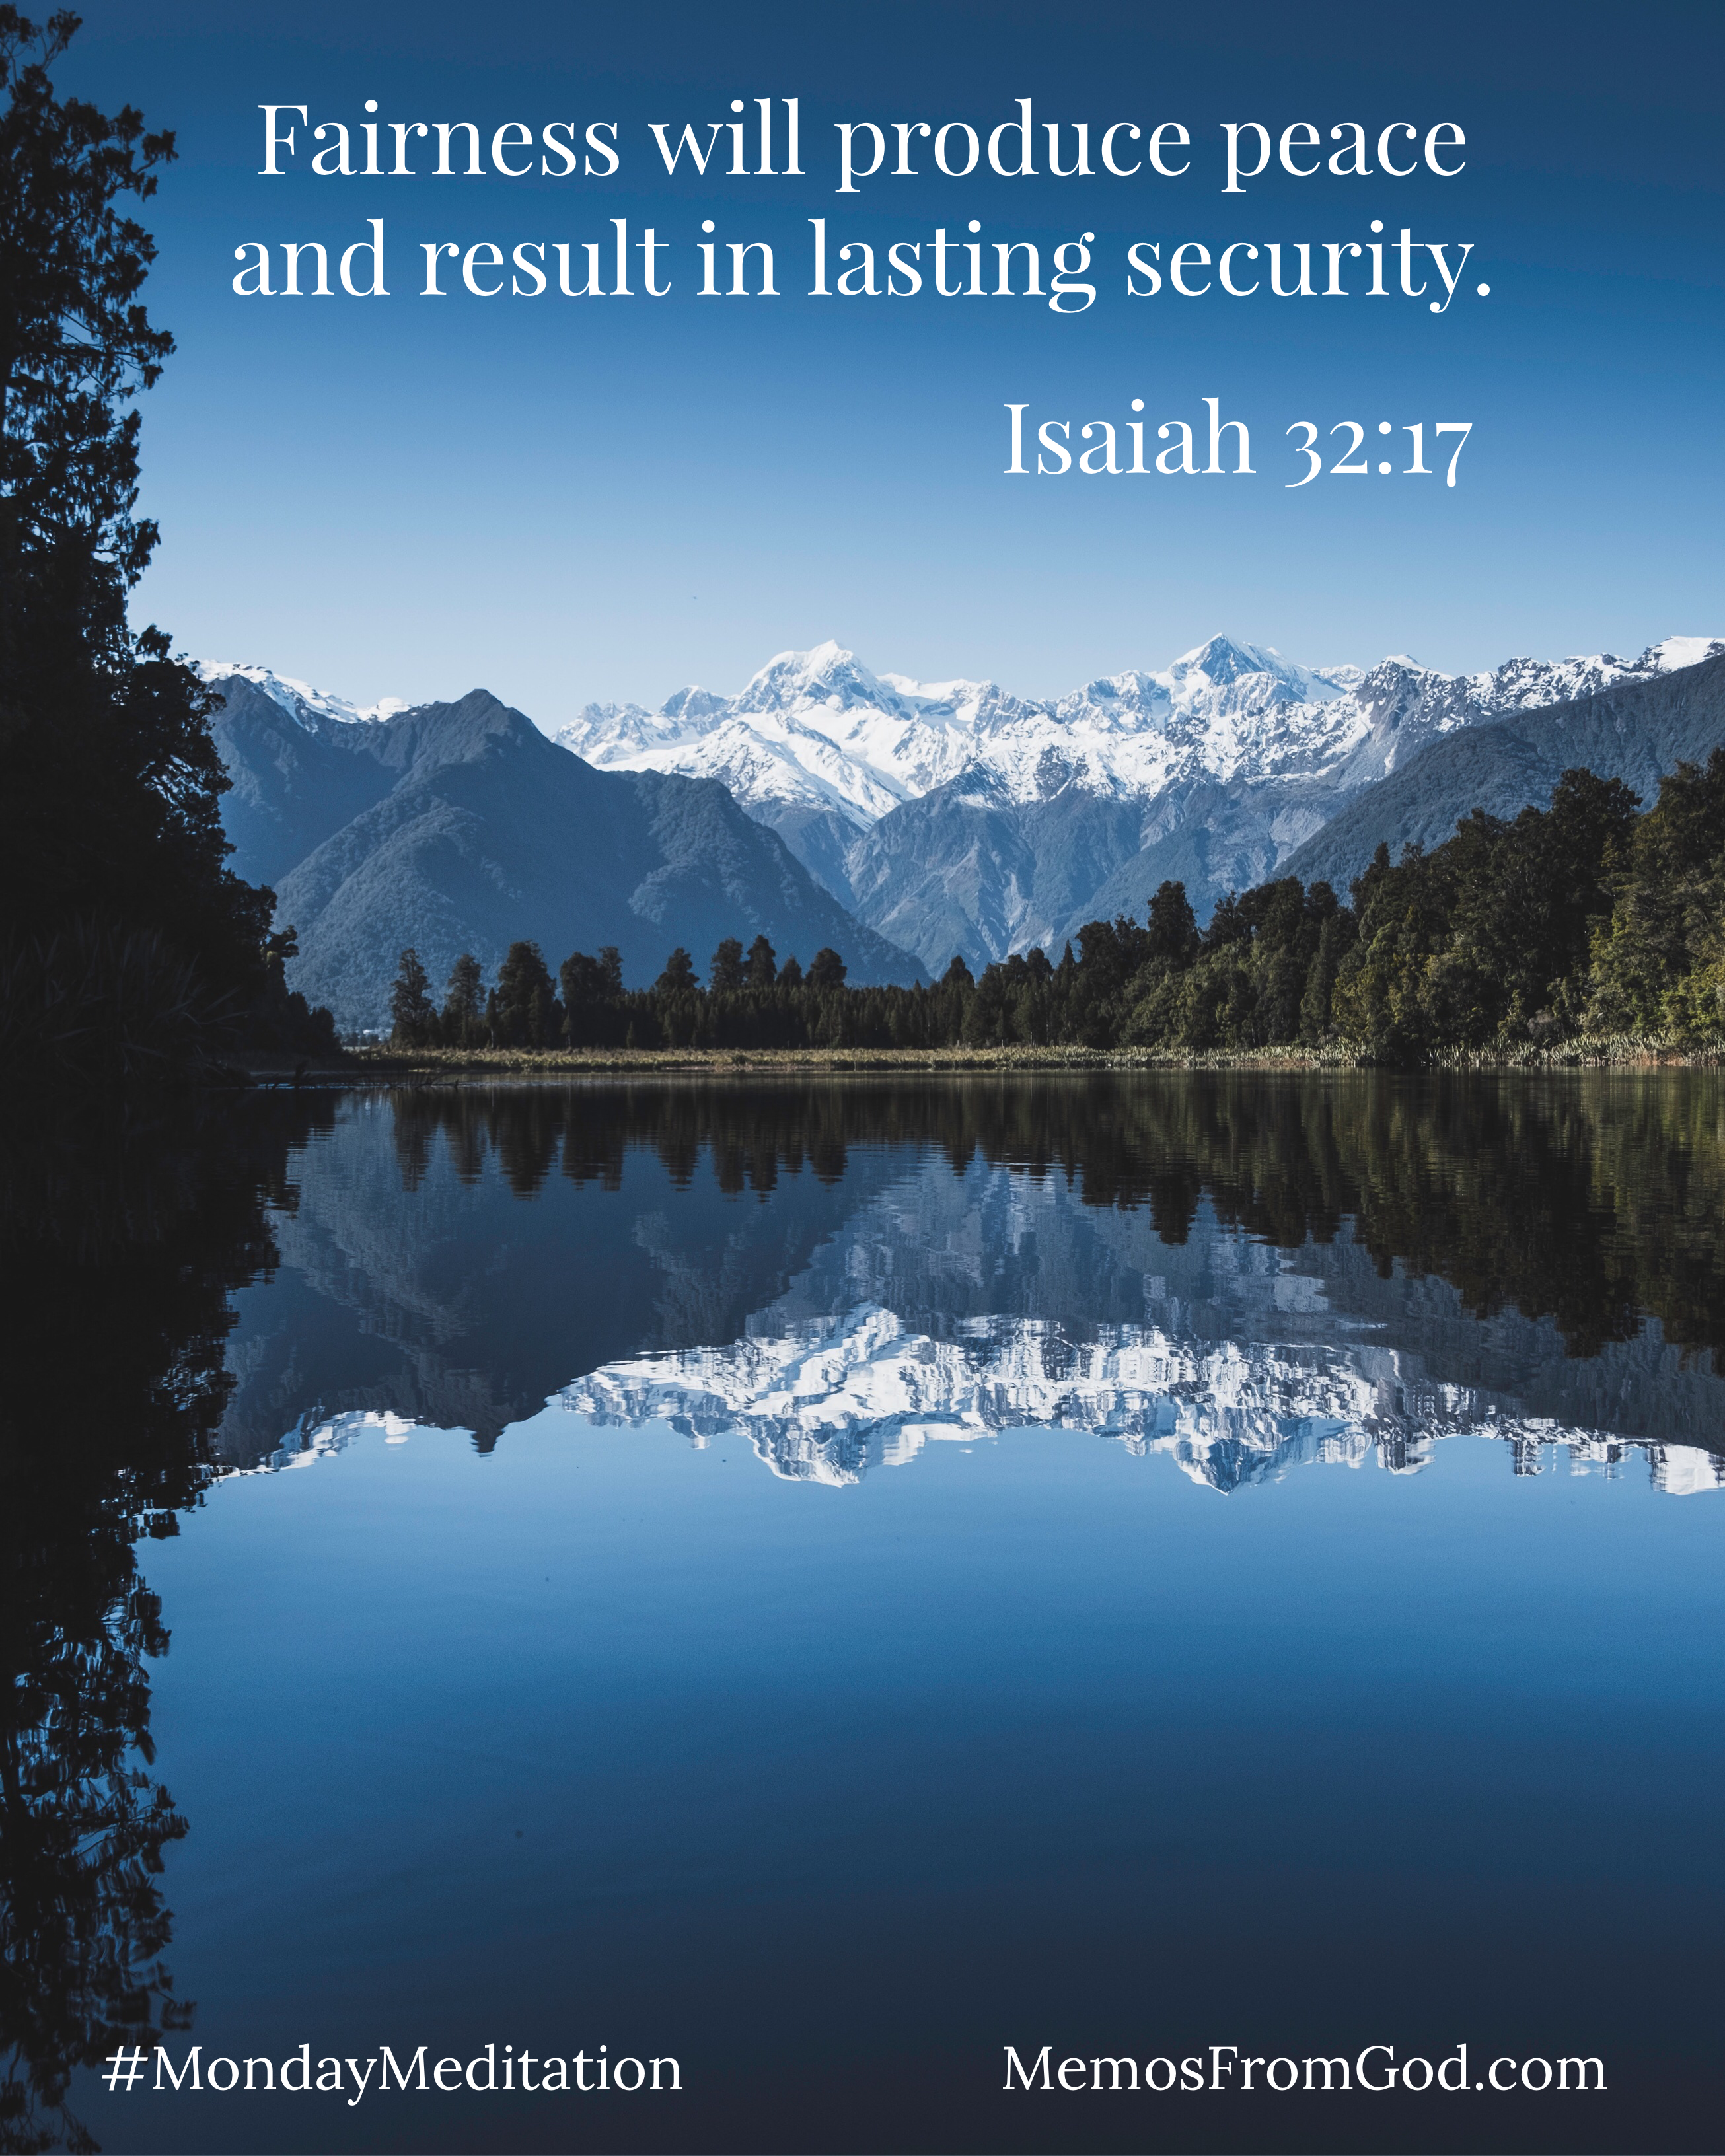 A deep blue sky, evergreen trees, and snow-capped mountains reflecting in a calm lake. Caption: Fairness will produce peace and result in lasting security. Isaiah 32:17